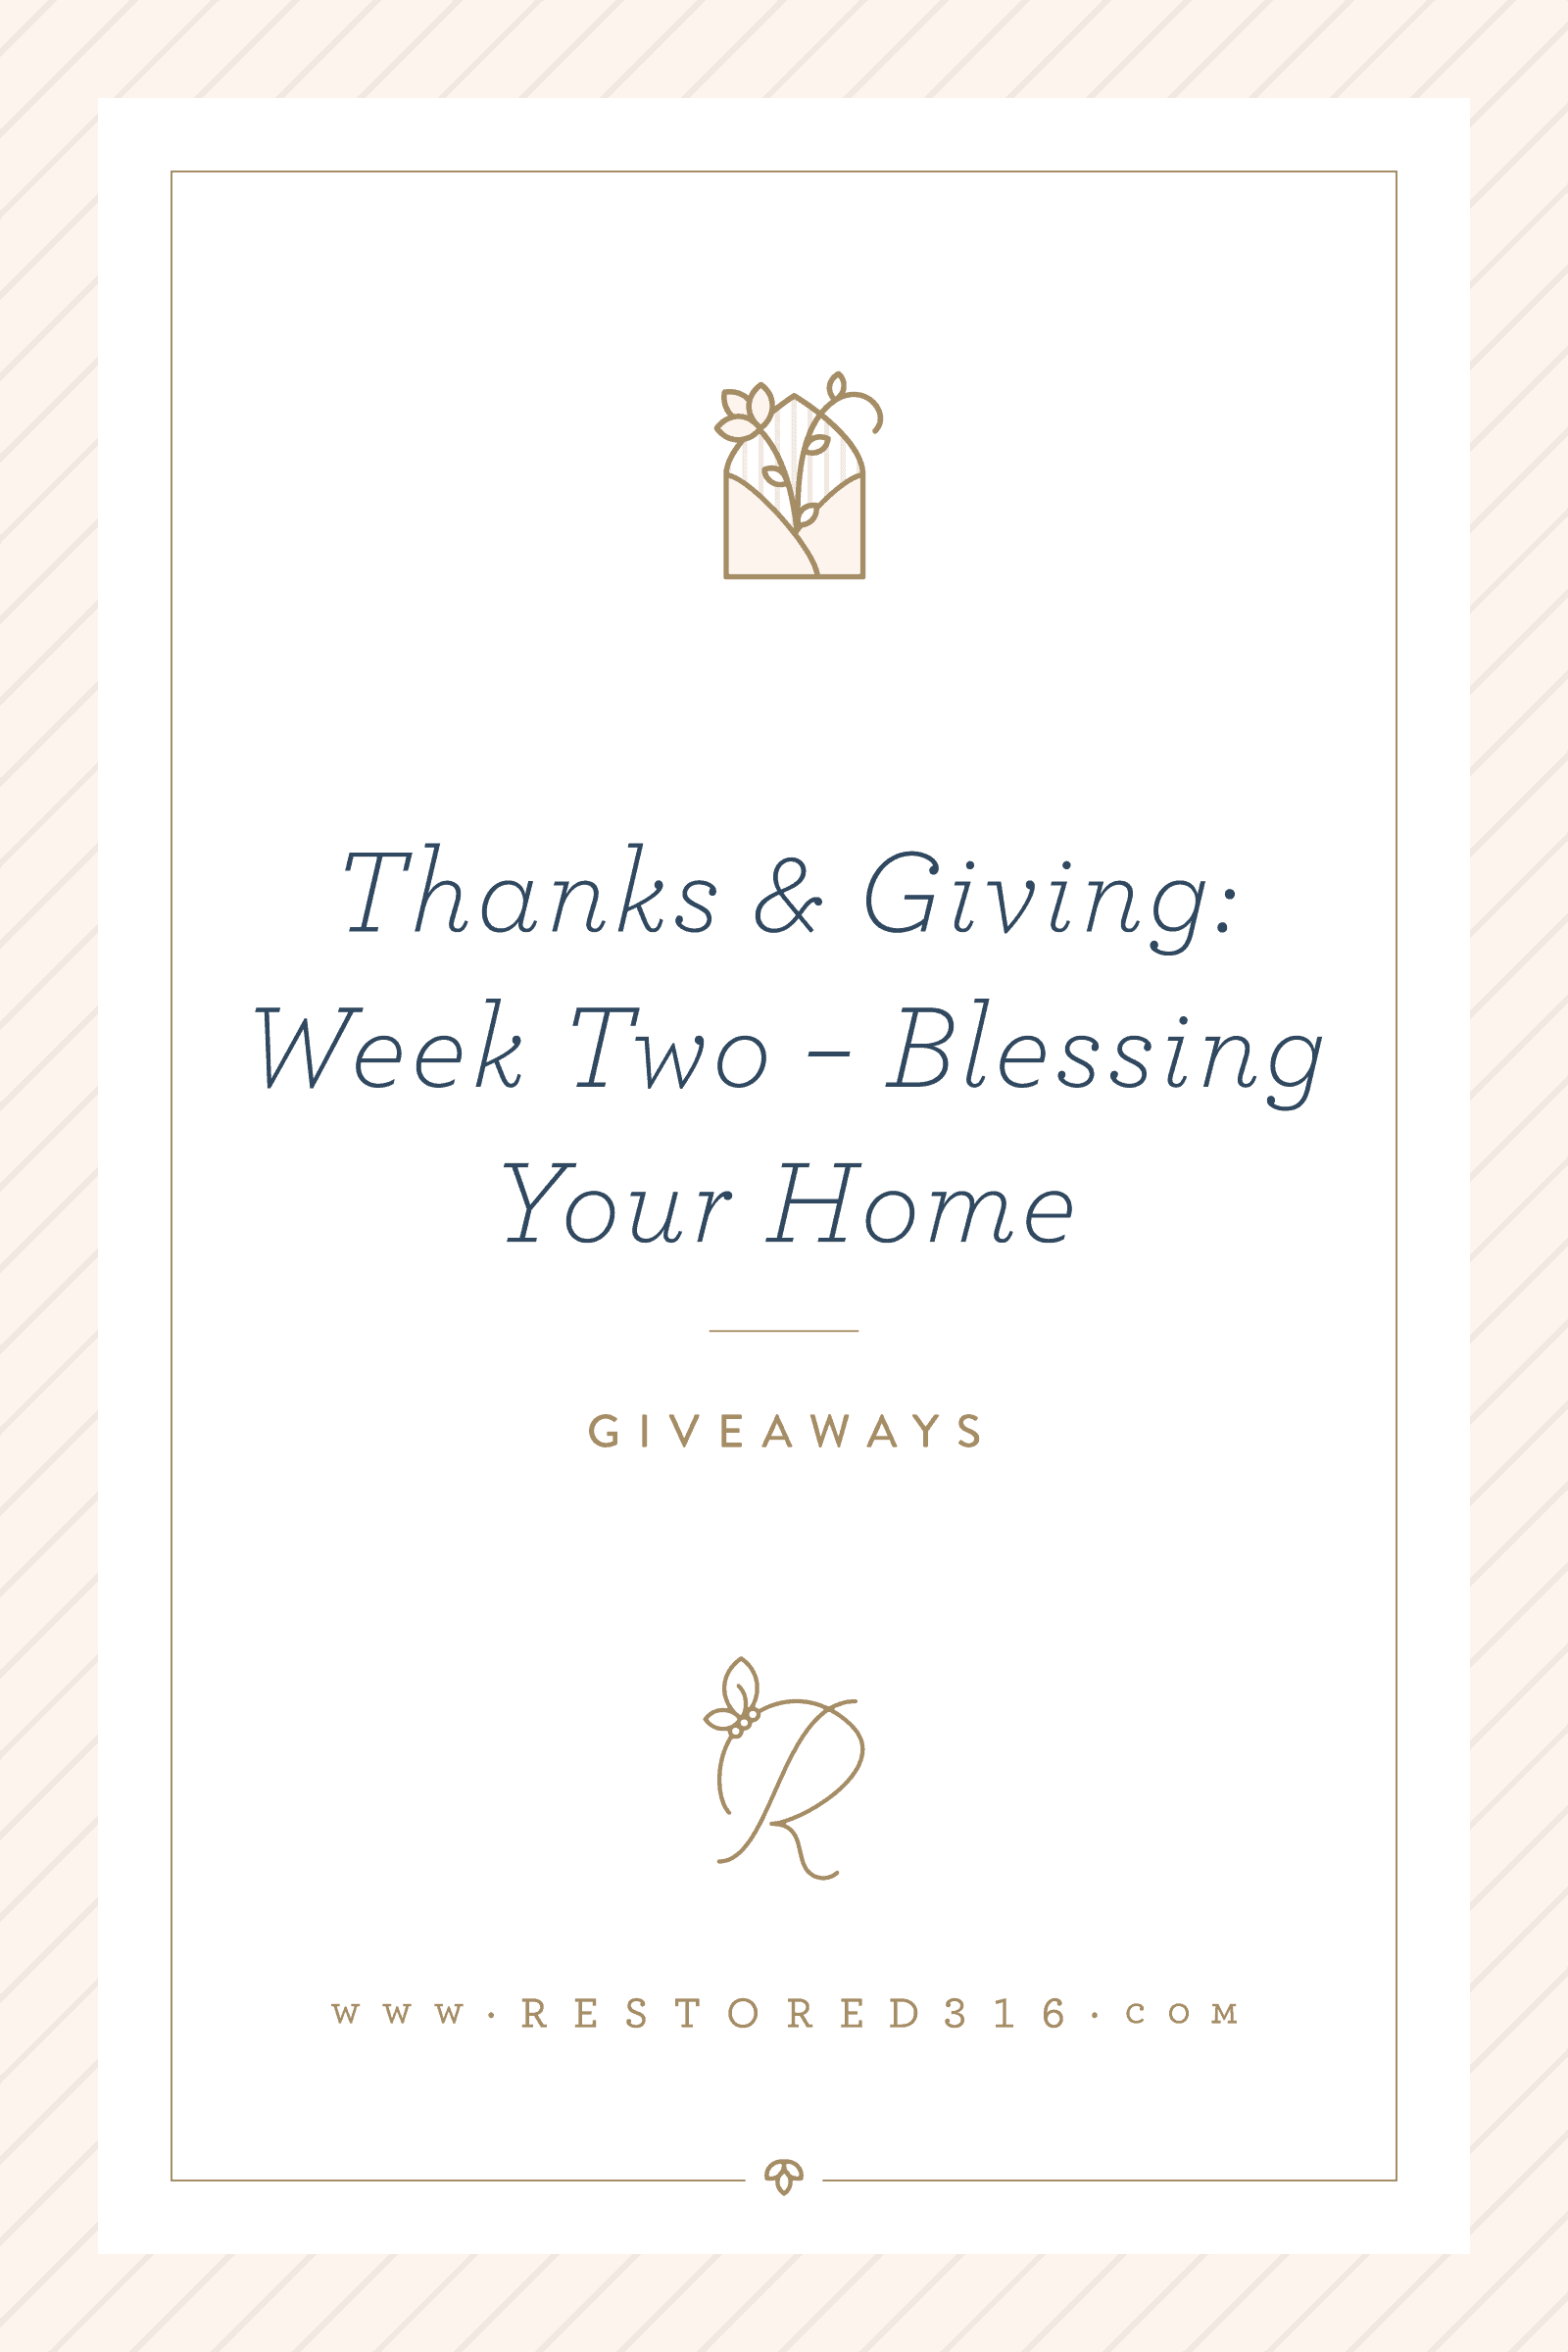 Thanks & Giving: Week Two – Blessing Your Home